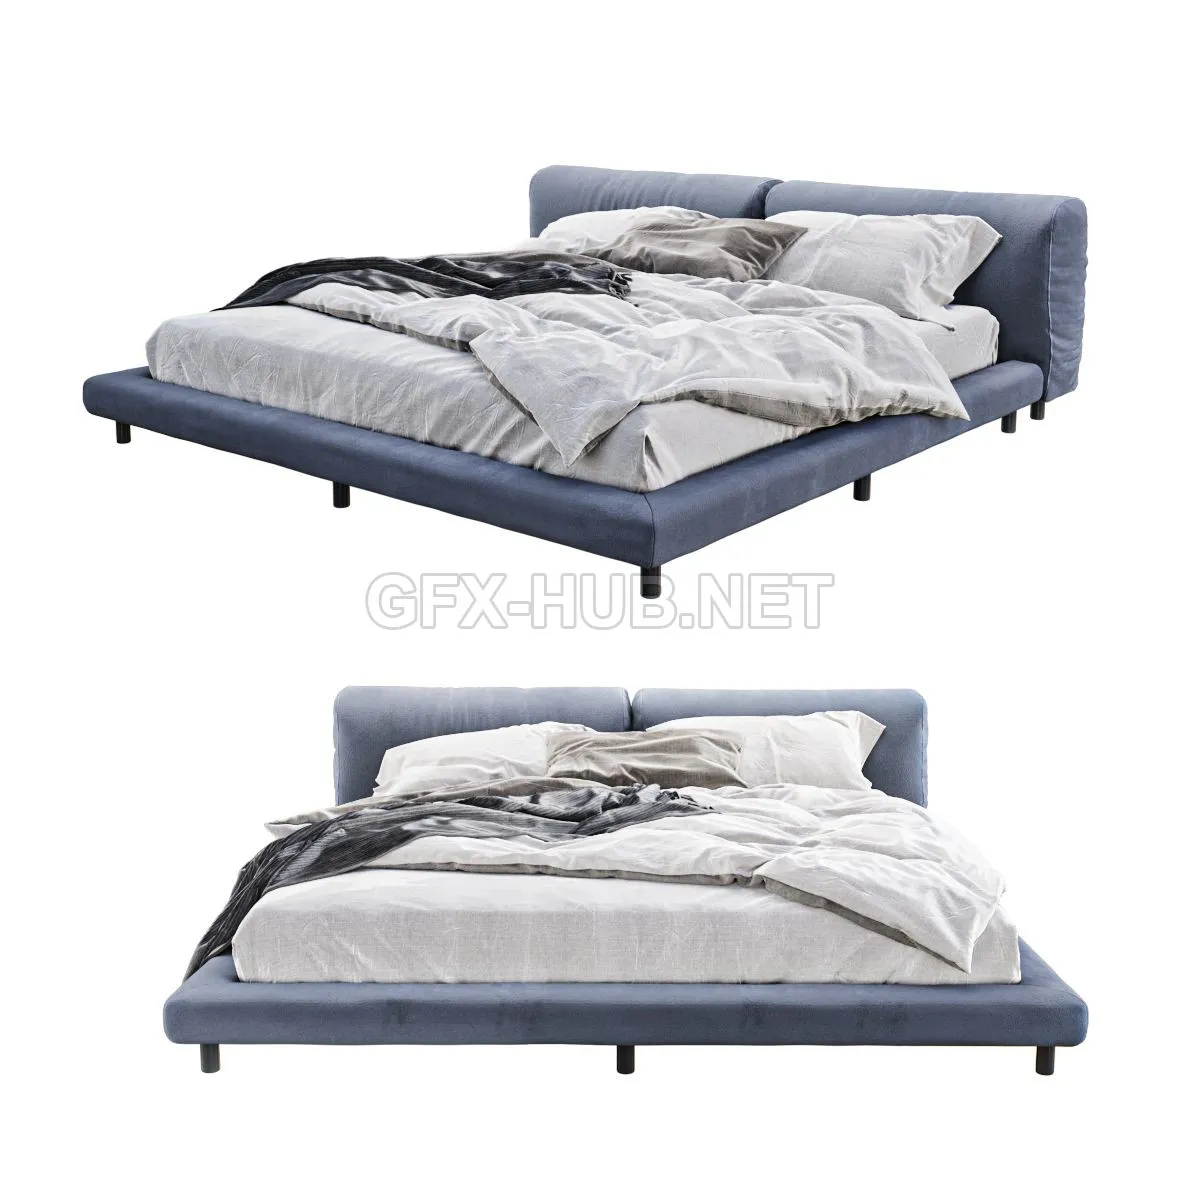 BED – Bed Softwall